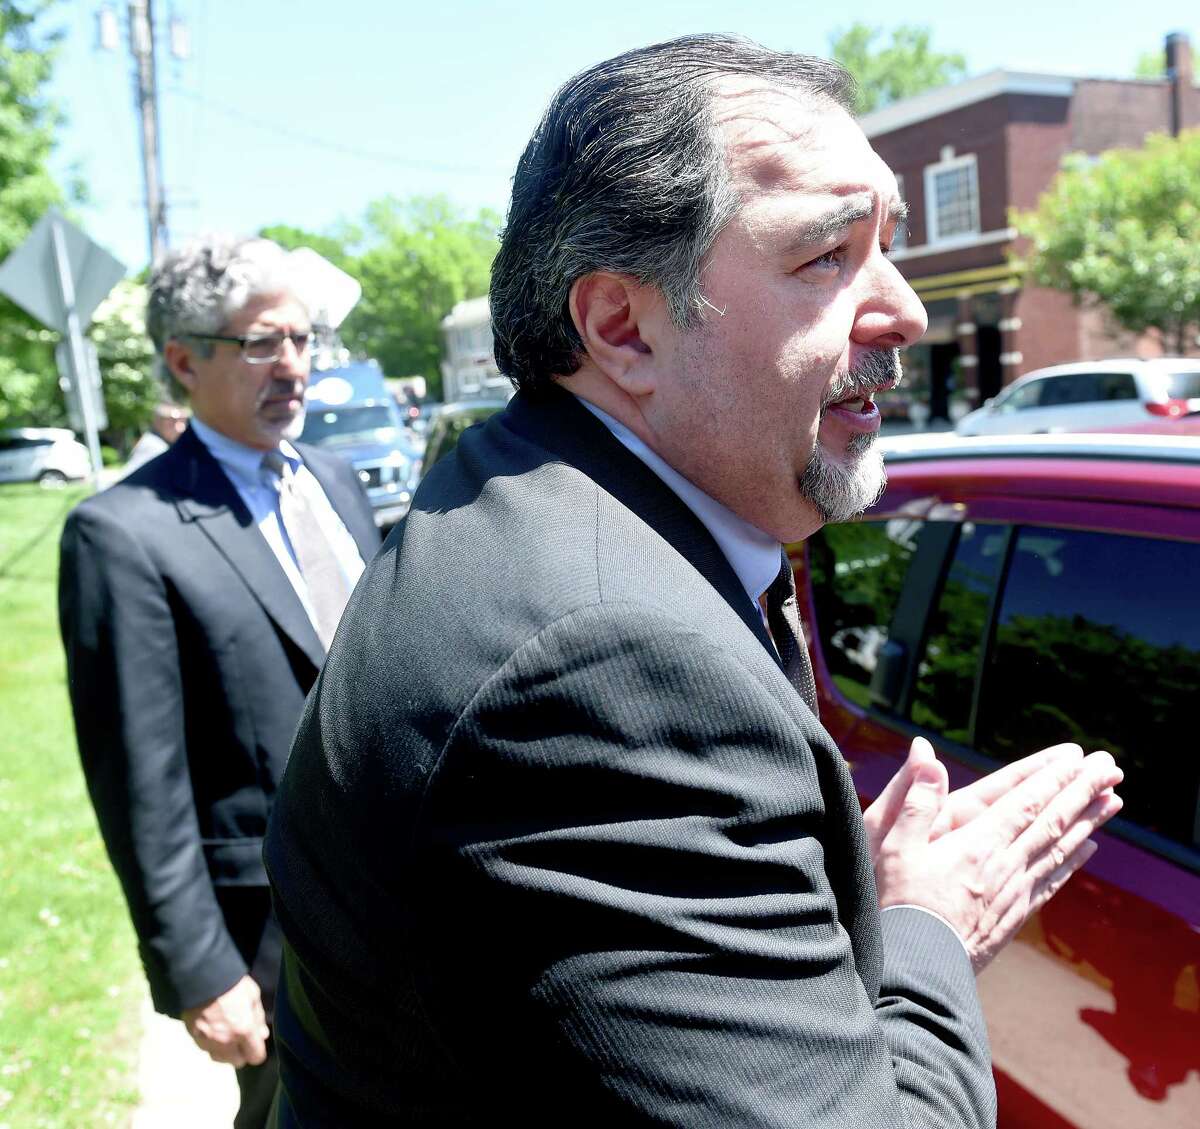 Jose Sanchez (right), father of Maren Sanchez, speaks with the press accompanied by his attorney, Anthony Bonadies (left), outside of Milford Superior Court after the sentencing of Christopher Plaskon on 6/6/2016. Photo by Arnold Gold/New Haven Register agold@newhavenregister.com